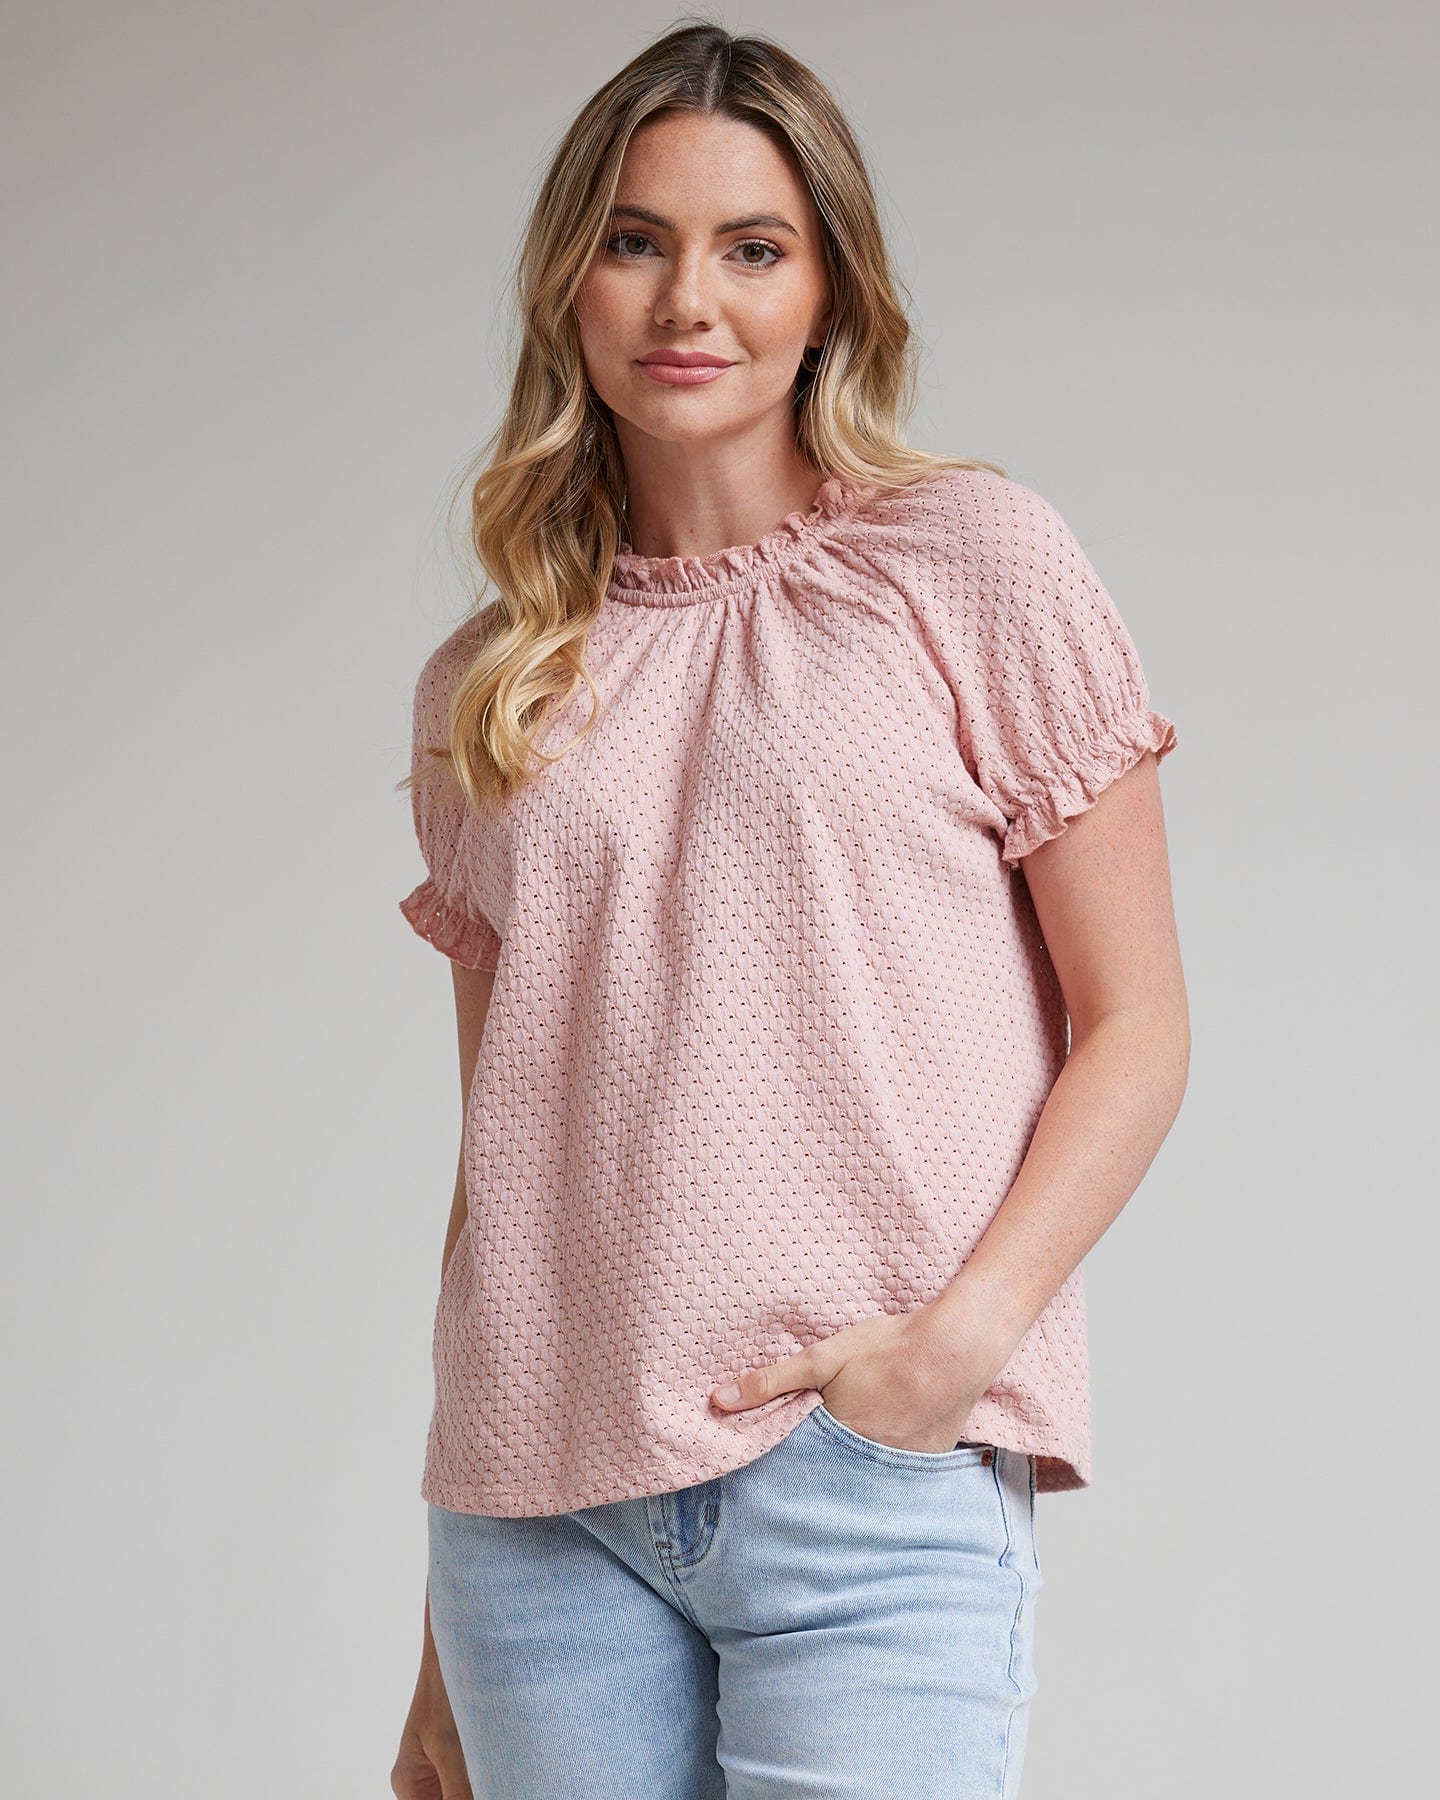 Woman in a short sleeve, mock neck with ruffles blouse